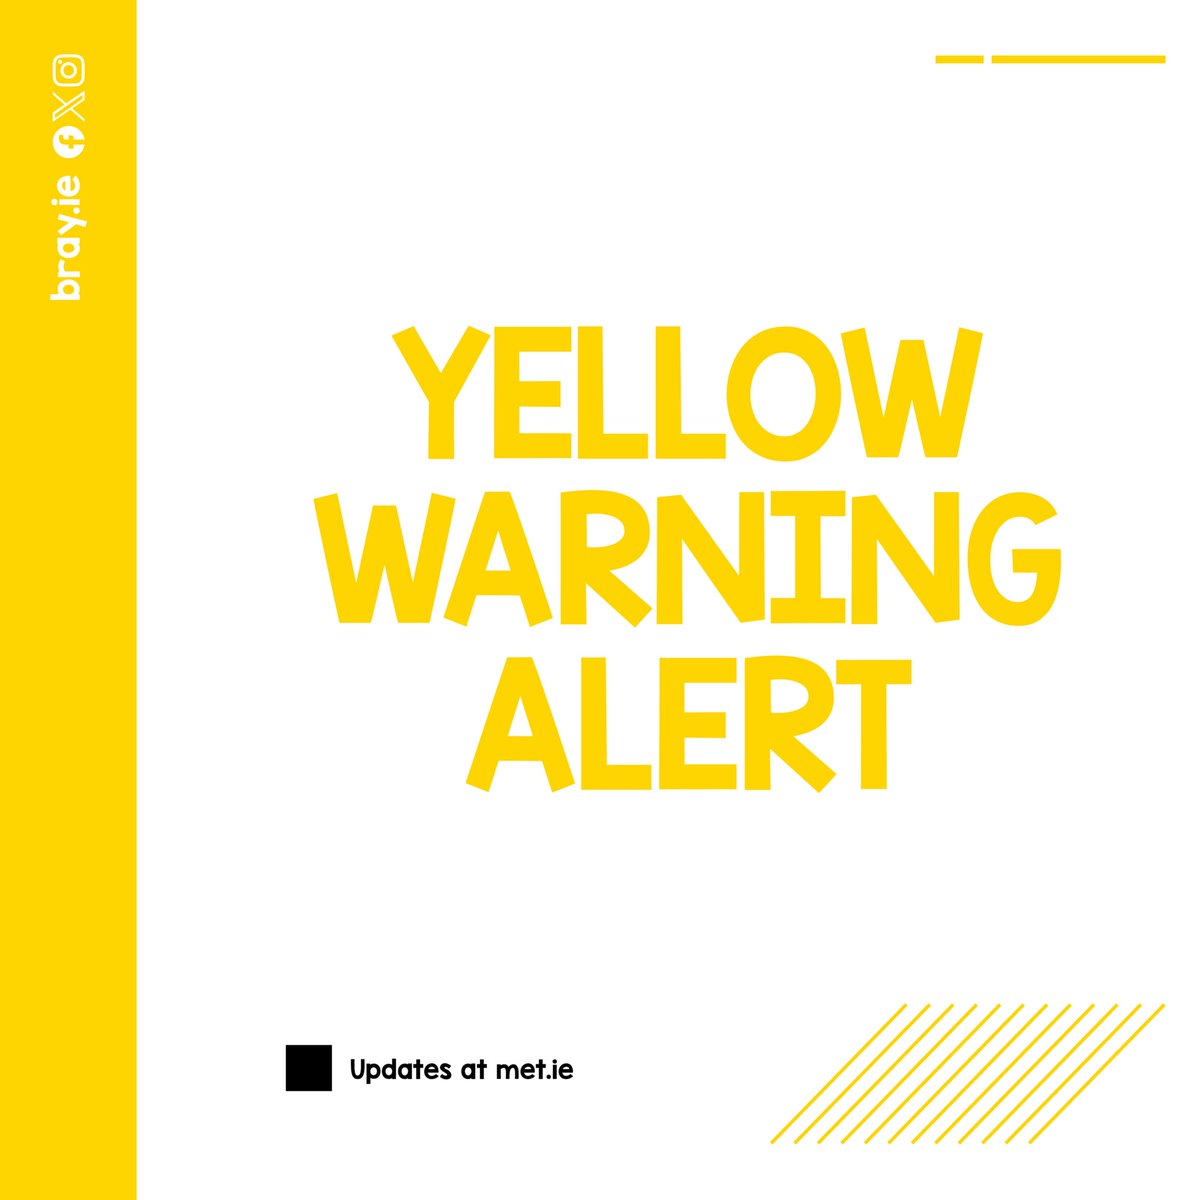 ⚠️ #StatusYellow rain warning has been issued ⚠️ Met Éireann says potential impacts include spot flooding, poor visibility, and travel delays. Valid until 6 pm to midnight this evening. Updates ➜ met.ie #YellowWarning #StaySafe #Bray